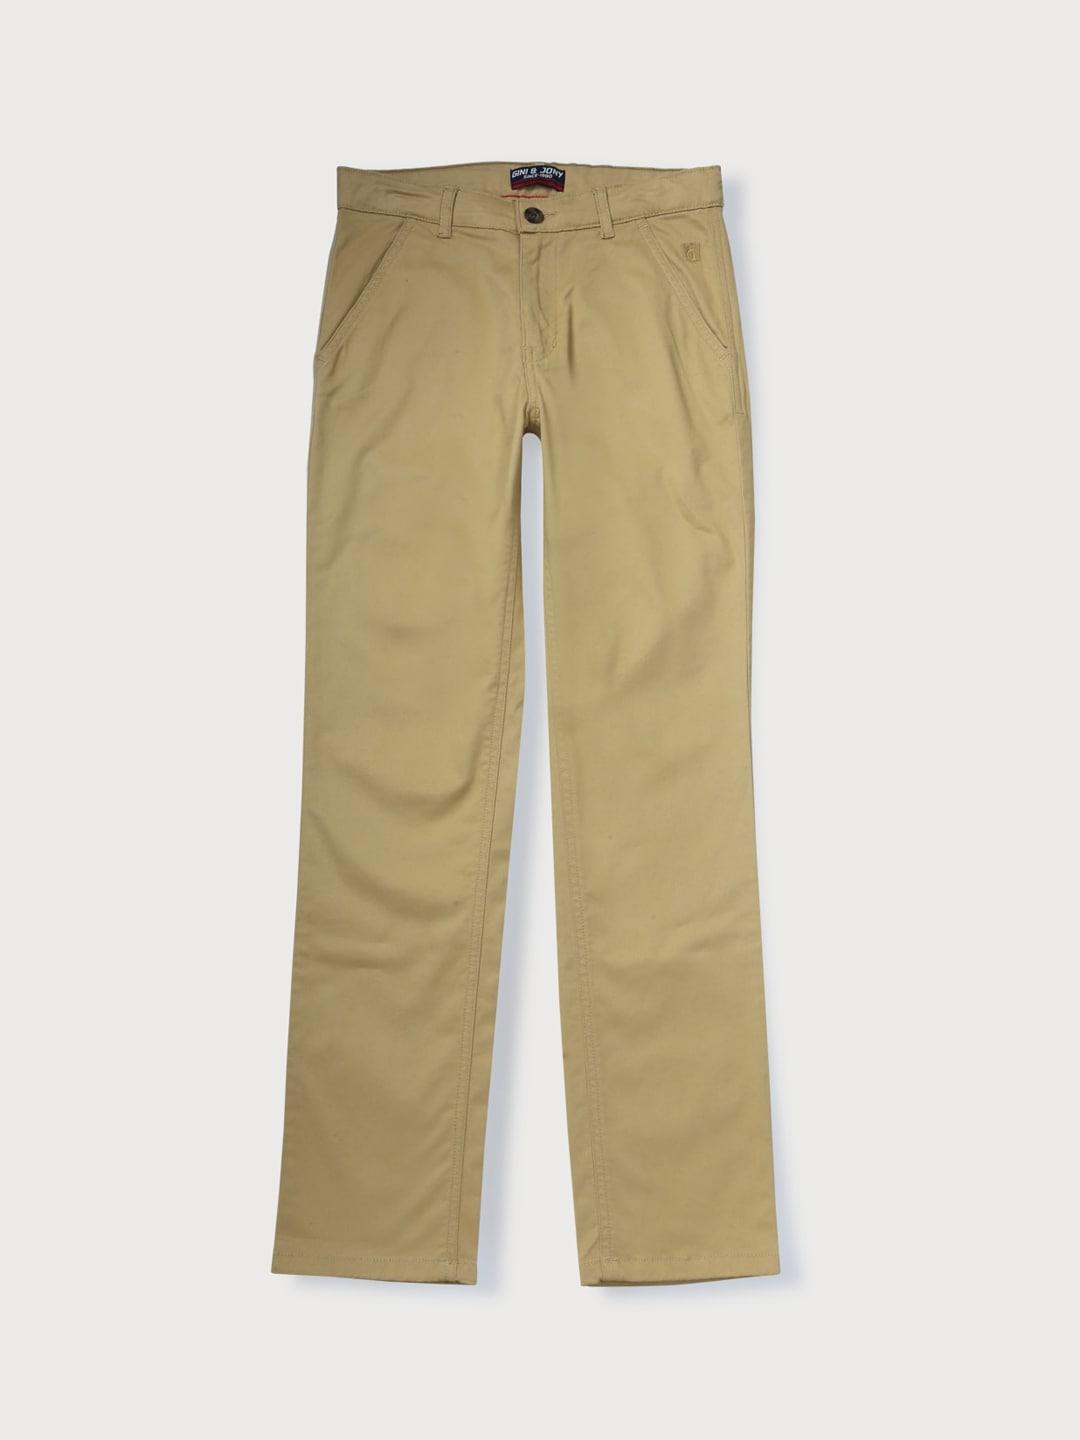 gini and jony boys cotton chinos trousers